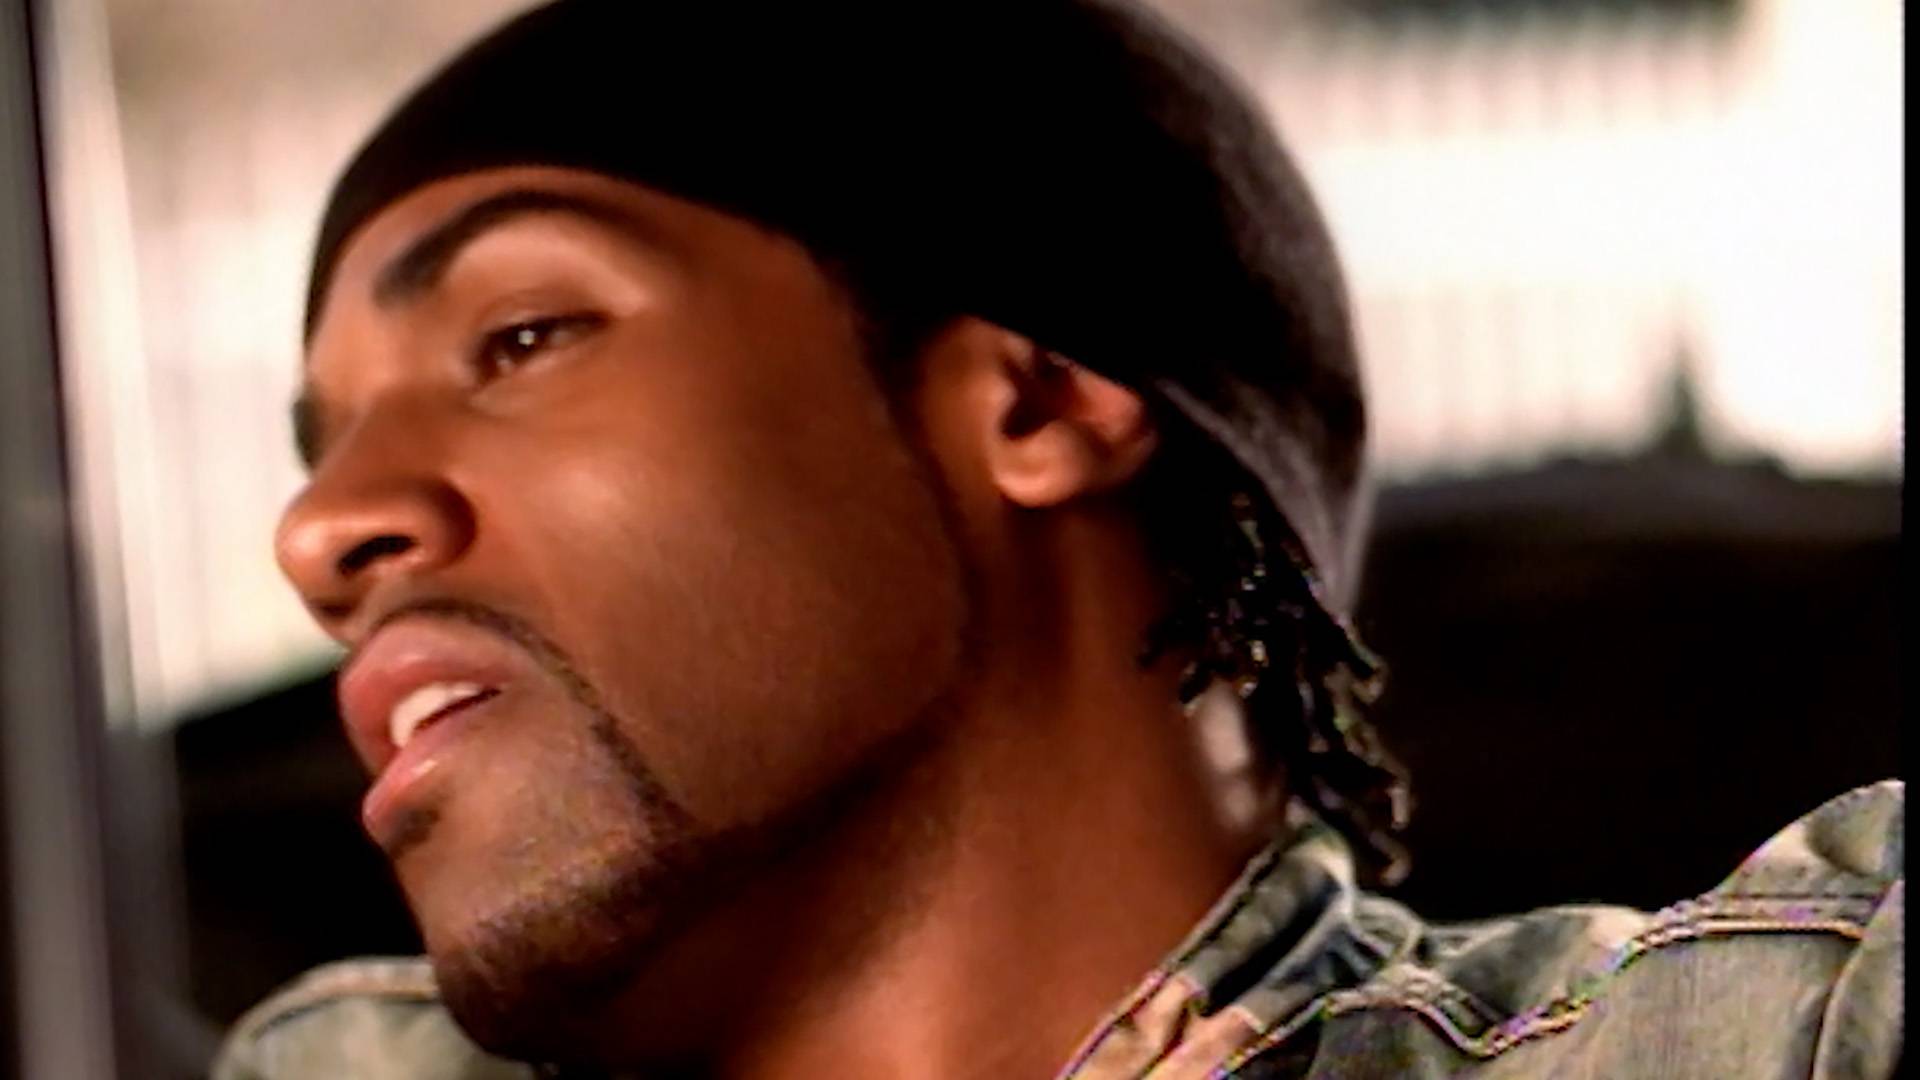 Get The Strap 50cent GIF - Get The Strap 50cent - Discover & Share GIFs